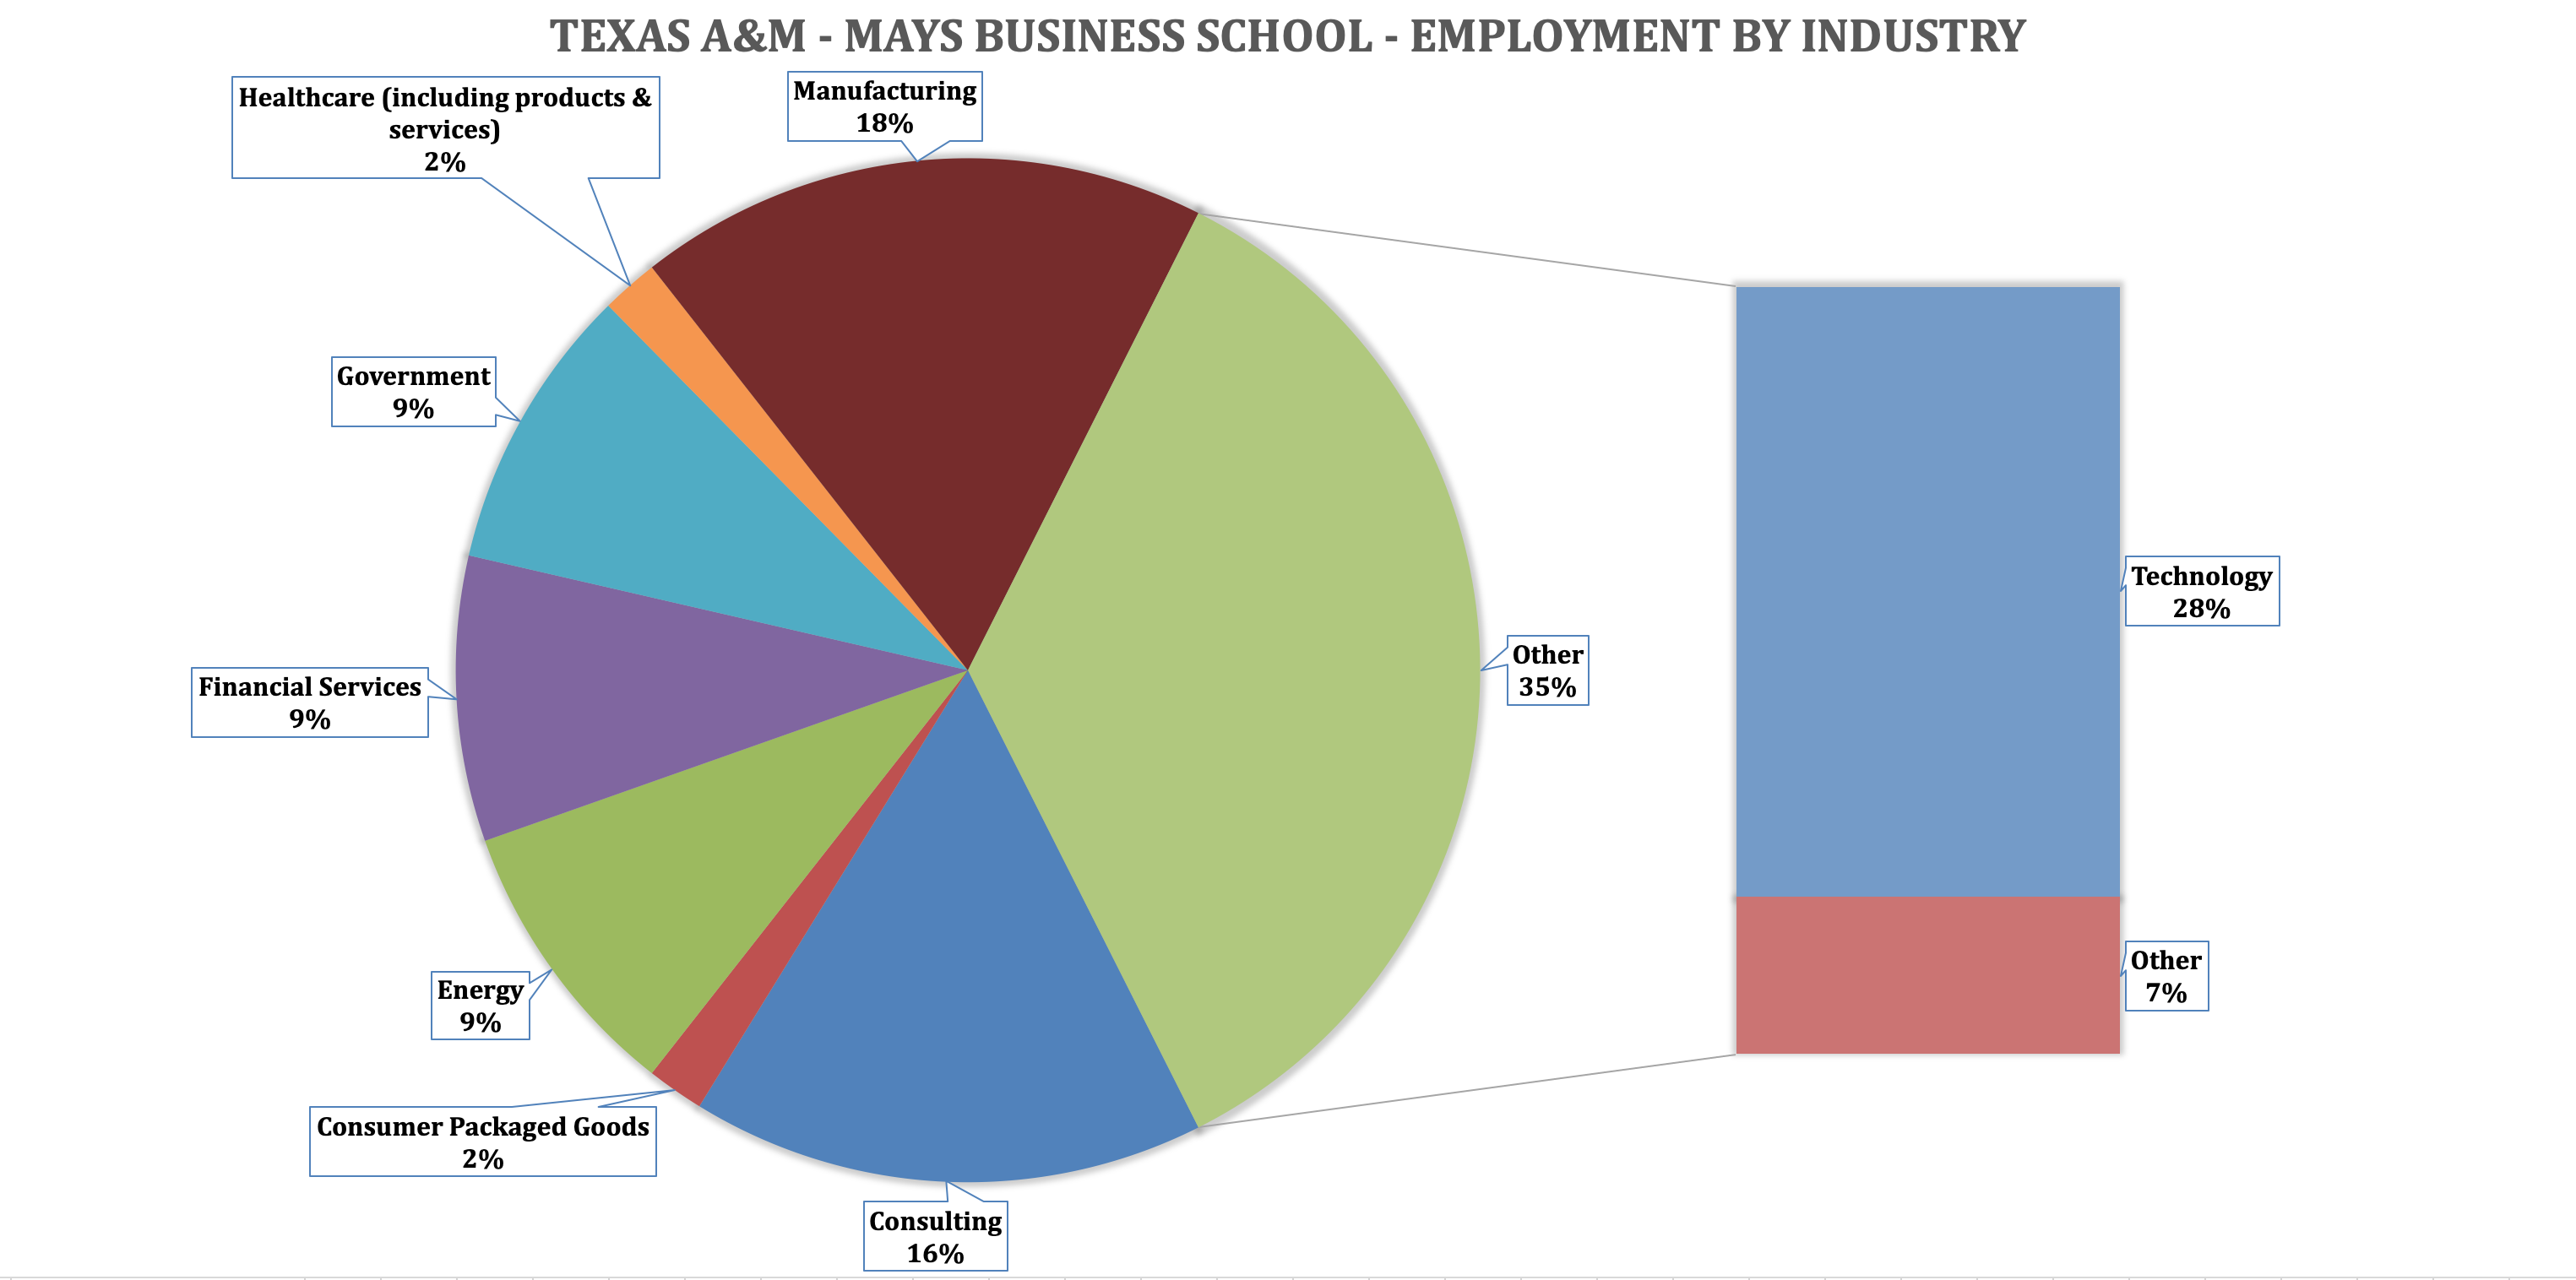 Mays Business School - Mays MBA Program - Employment by Industry